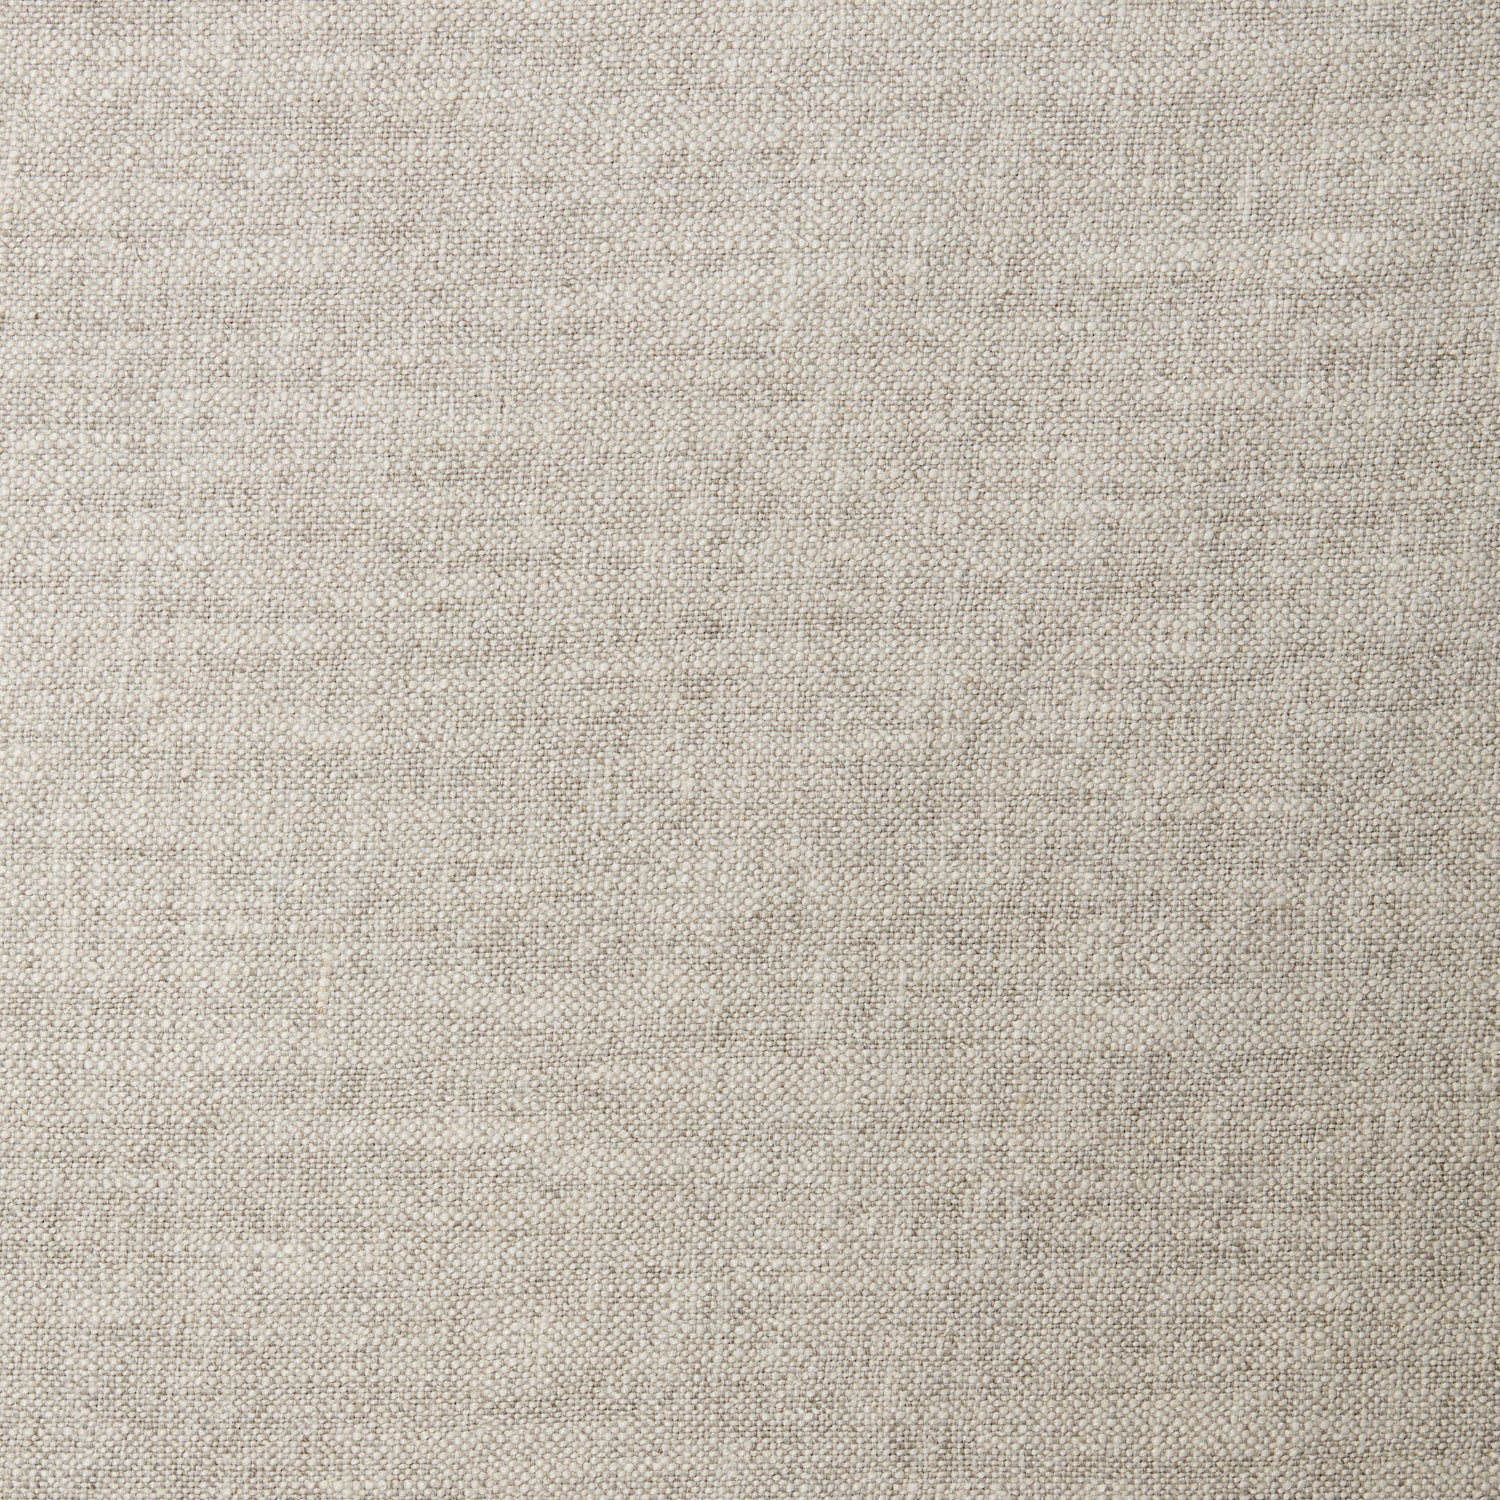 Normandy Fabric shown flat in a stone grey neutral color